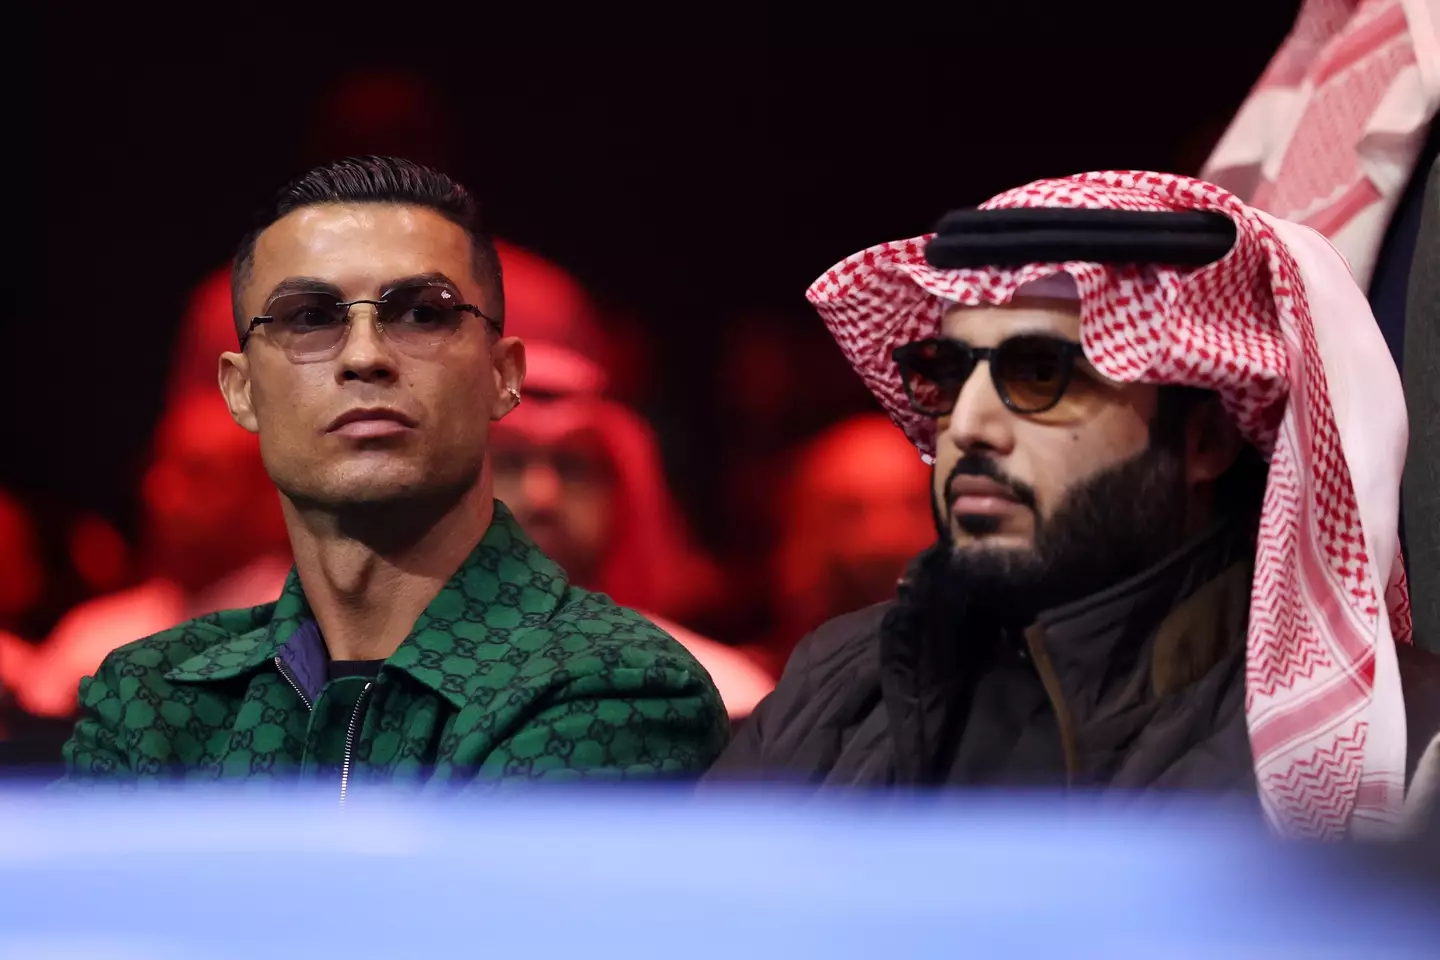 Cristiano Ronaldo in attendance for the 'Day of Reckoning' card. Image: Getty 